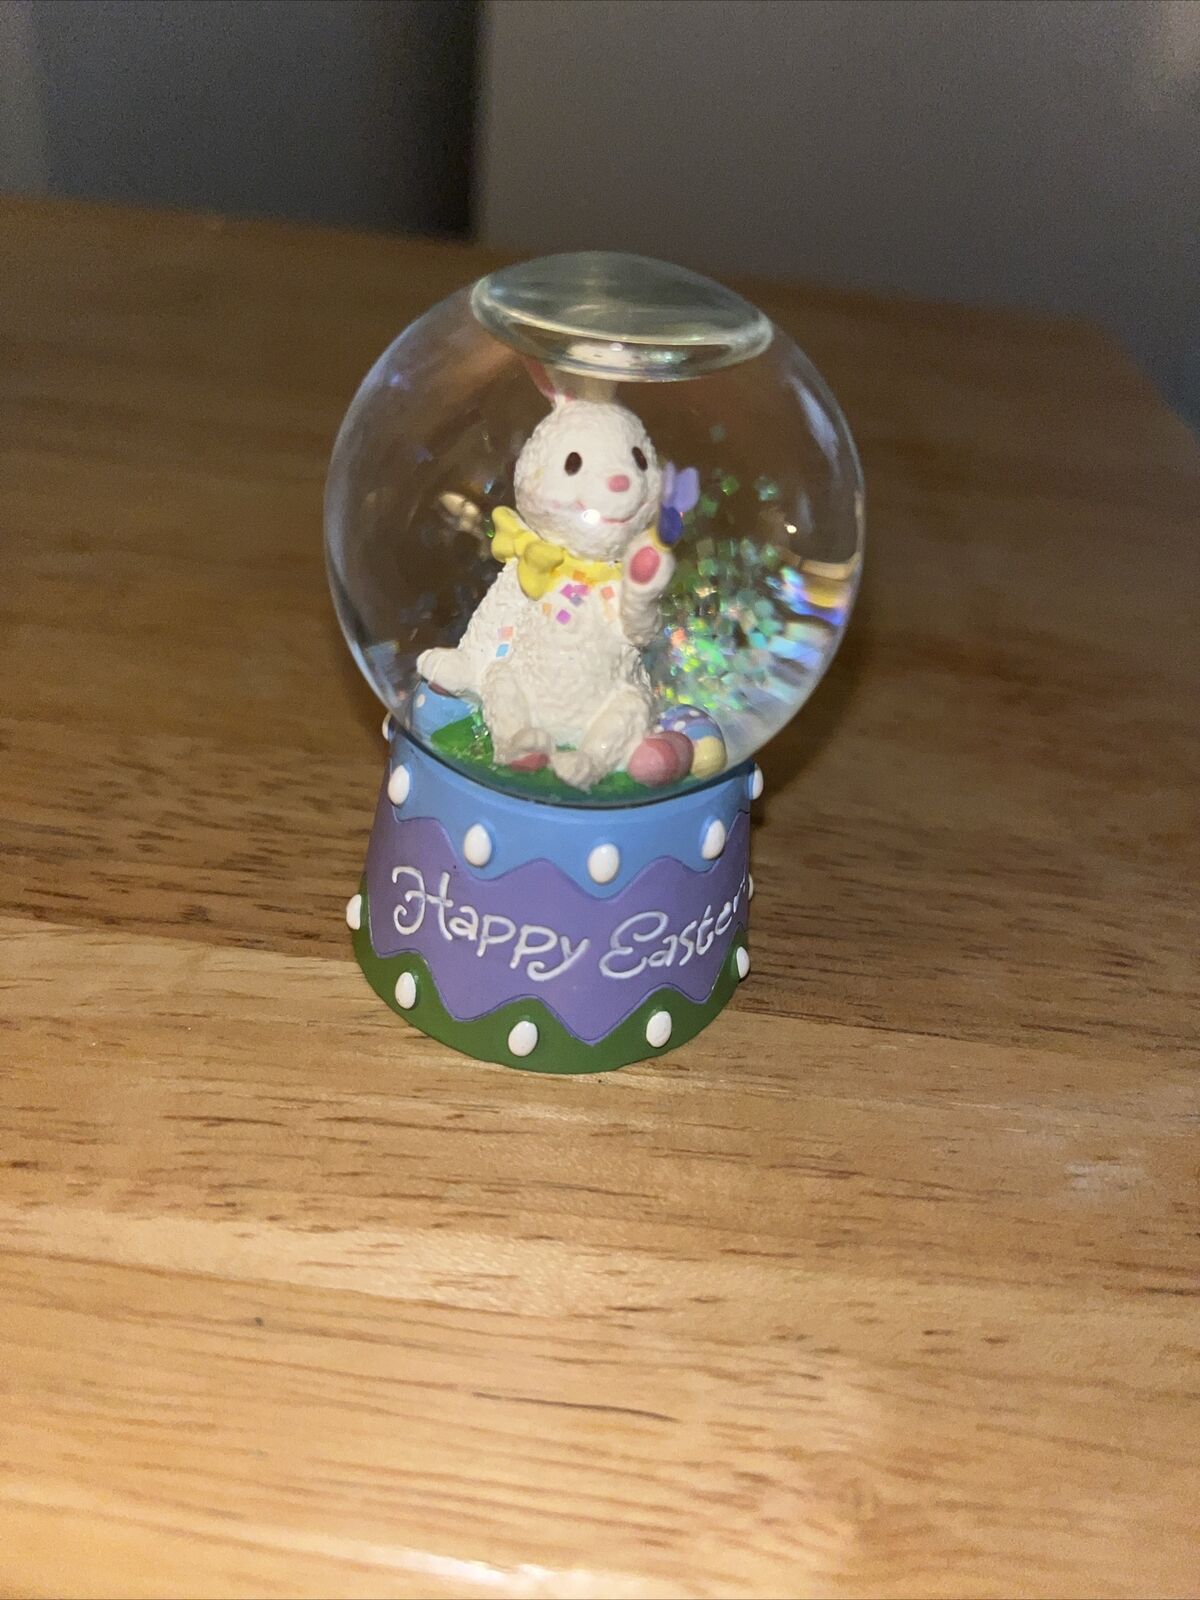 Small Egg Shaped Snow Globe With Easter Bunny Inside